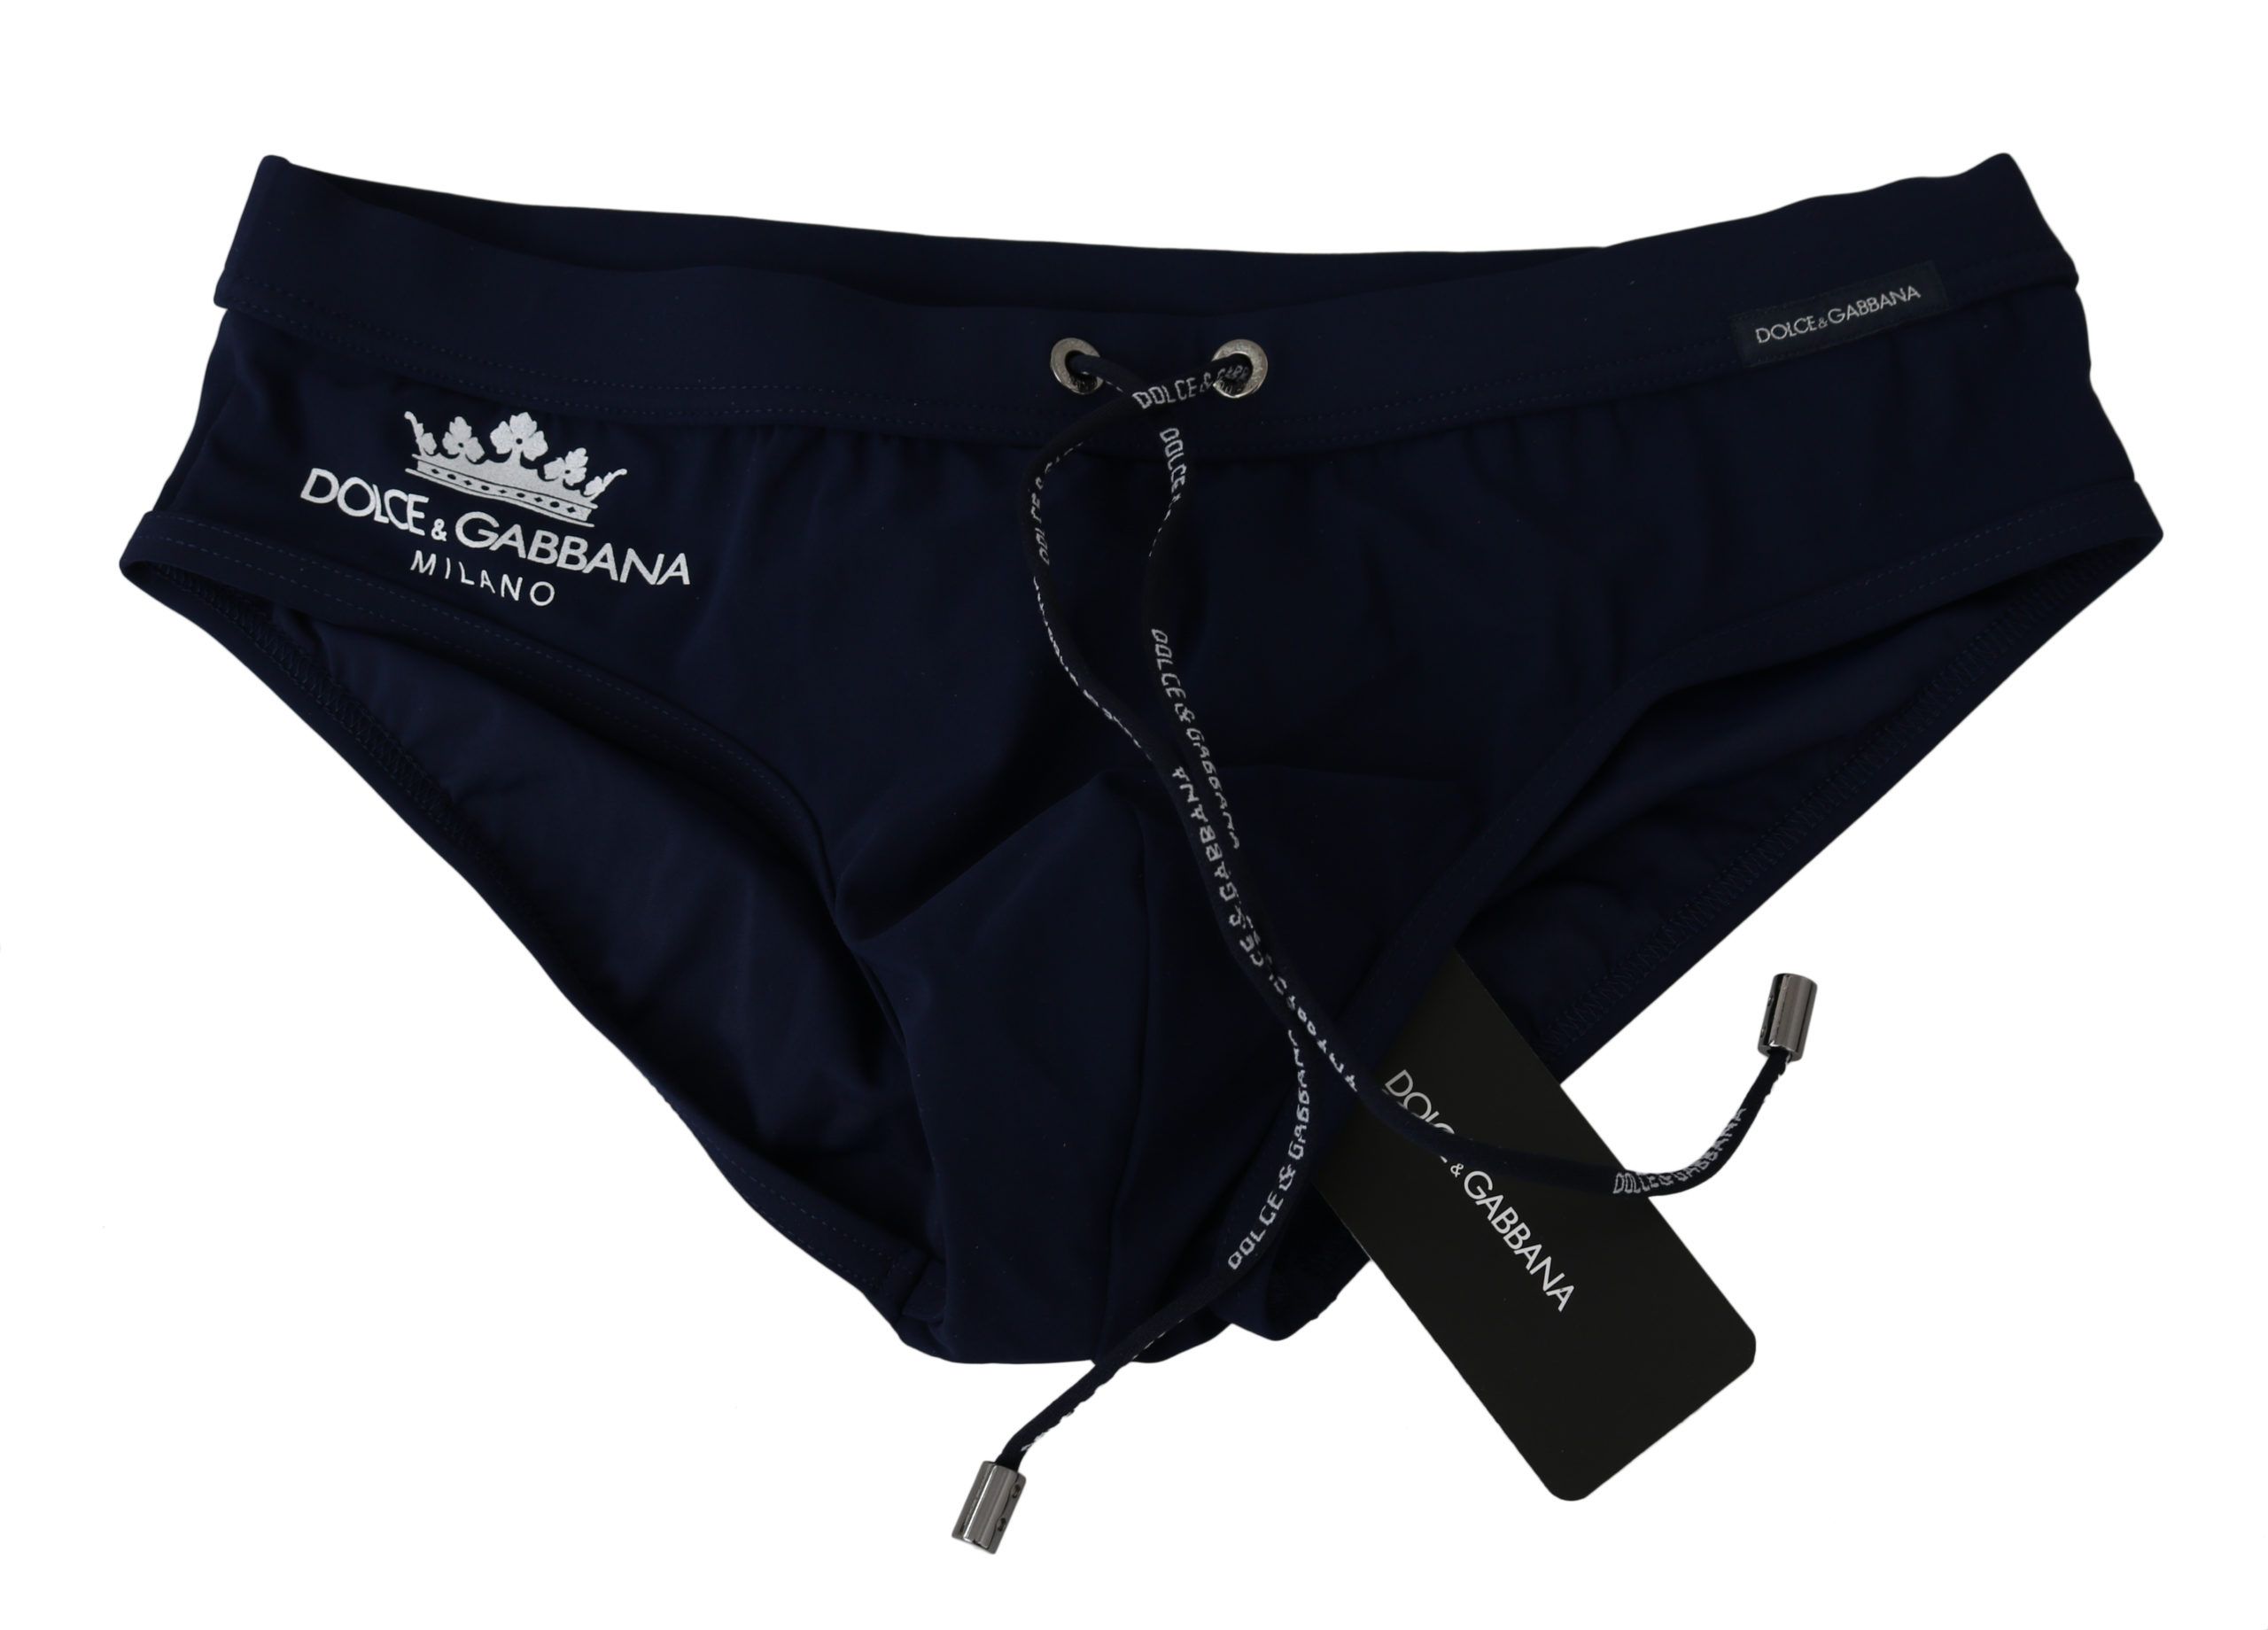 DOLCE&GABBANA. 
Absolutely stunning, 100% Authentic, brand new with tags Dolce&Gabbana Beachwear. . 
Modell: Swim briefs beachwear 
Color: Dark Blue with white crown logo 
Material: . 75% Nylon 25% Elastane
Waist strap. 
Logo details. 
Great fitting and comfort.